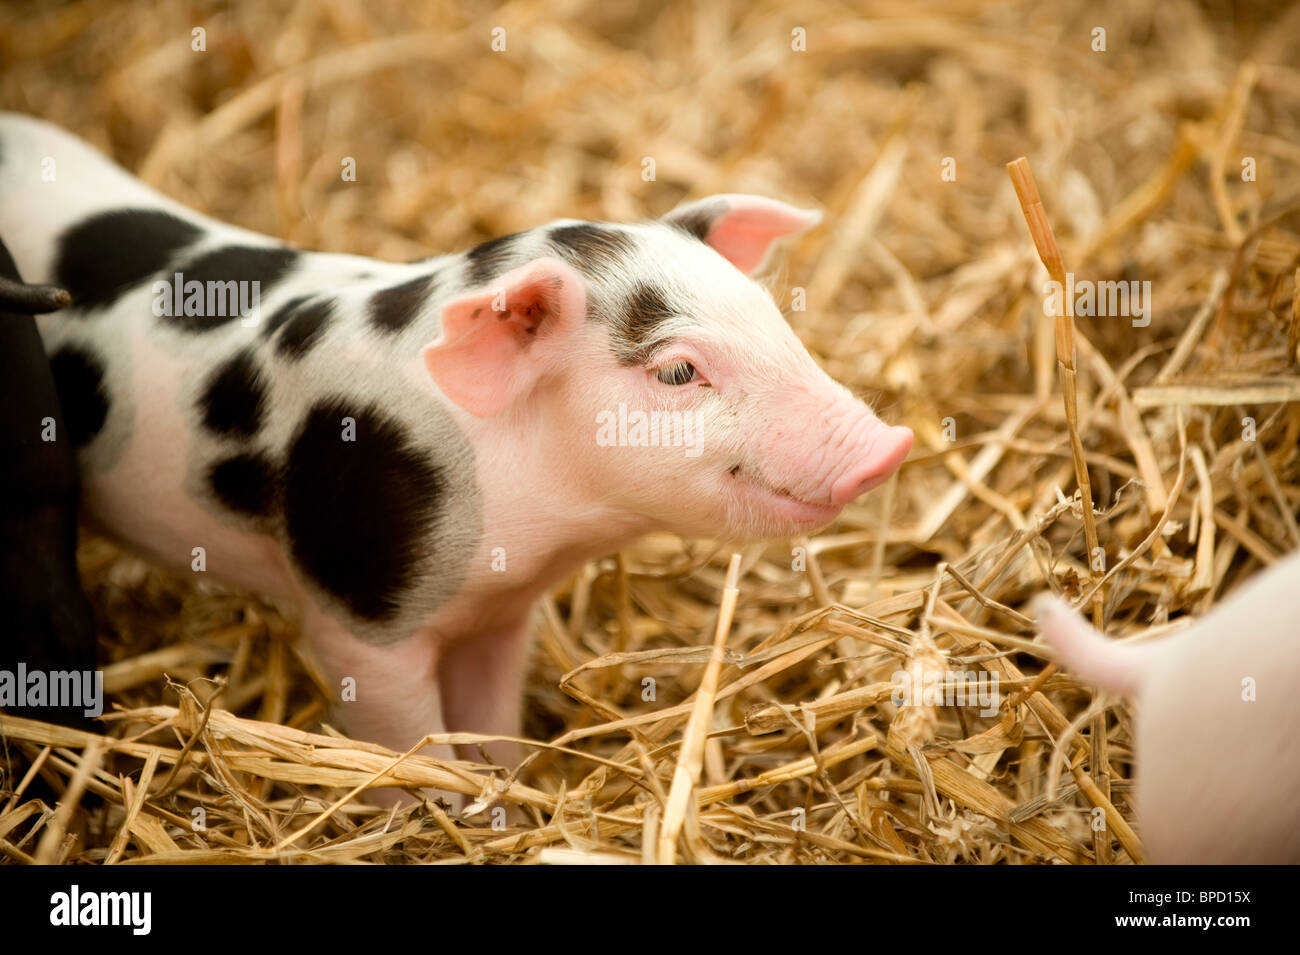 A young smiley Oxford Sandy and Black piglet in a pen at the South of England show, UK. Picture by Jim Holden. Stock Photo